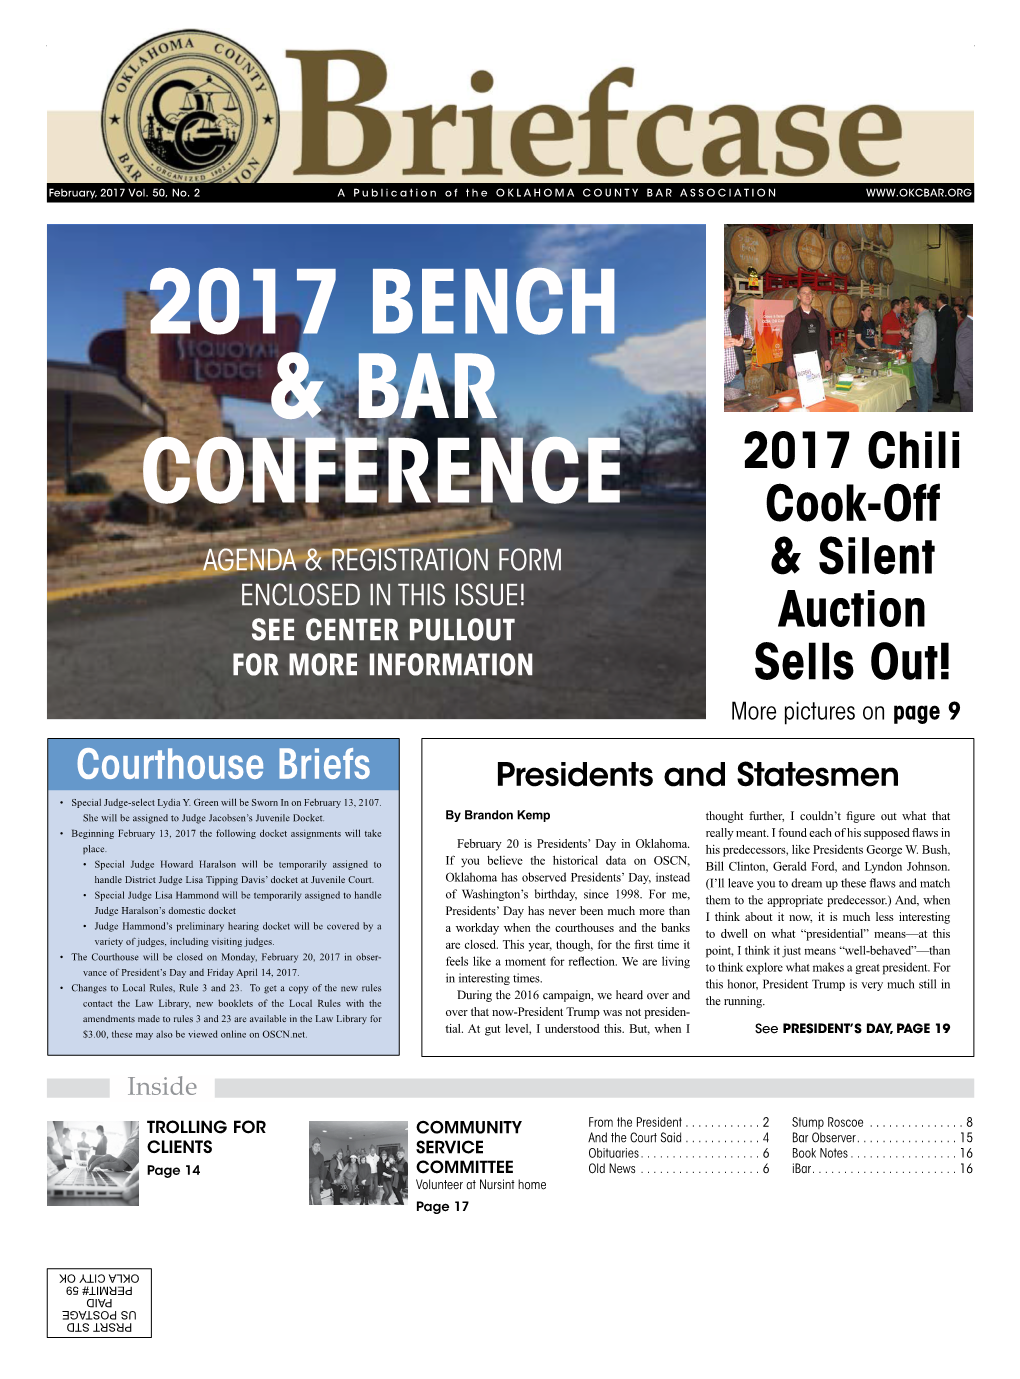 2017 Bench & Bar Conference